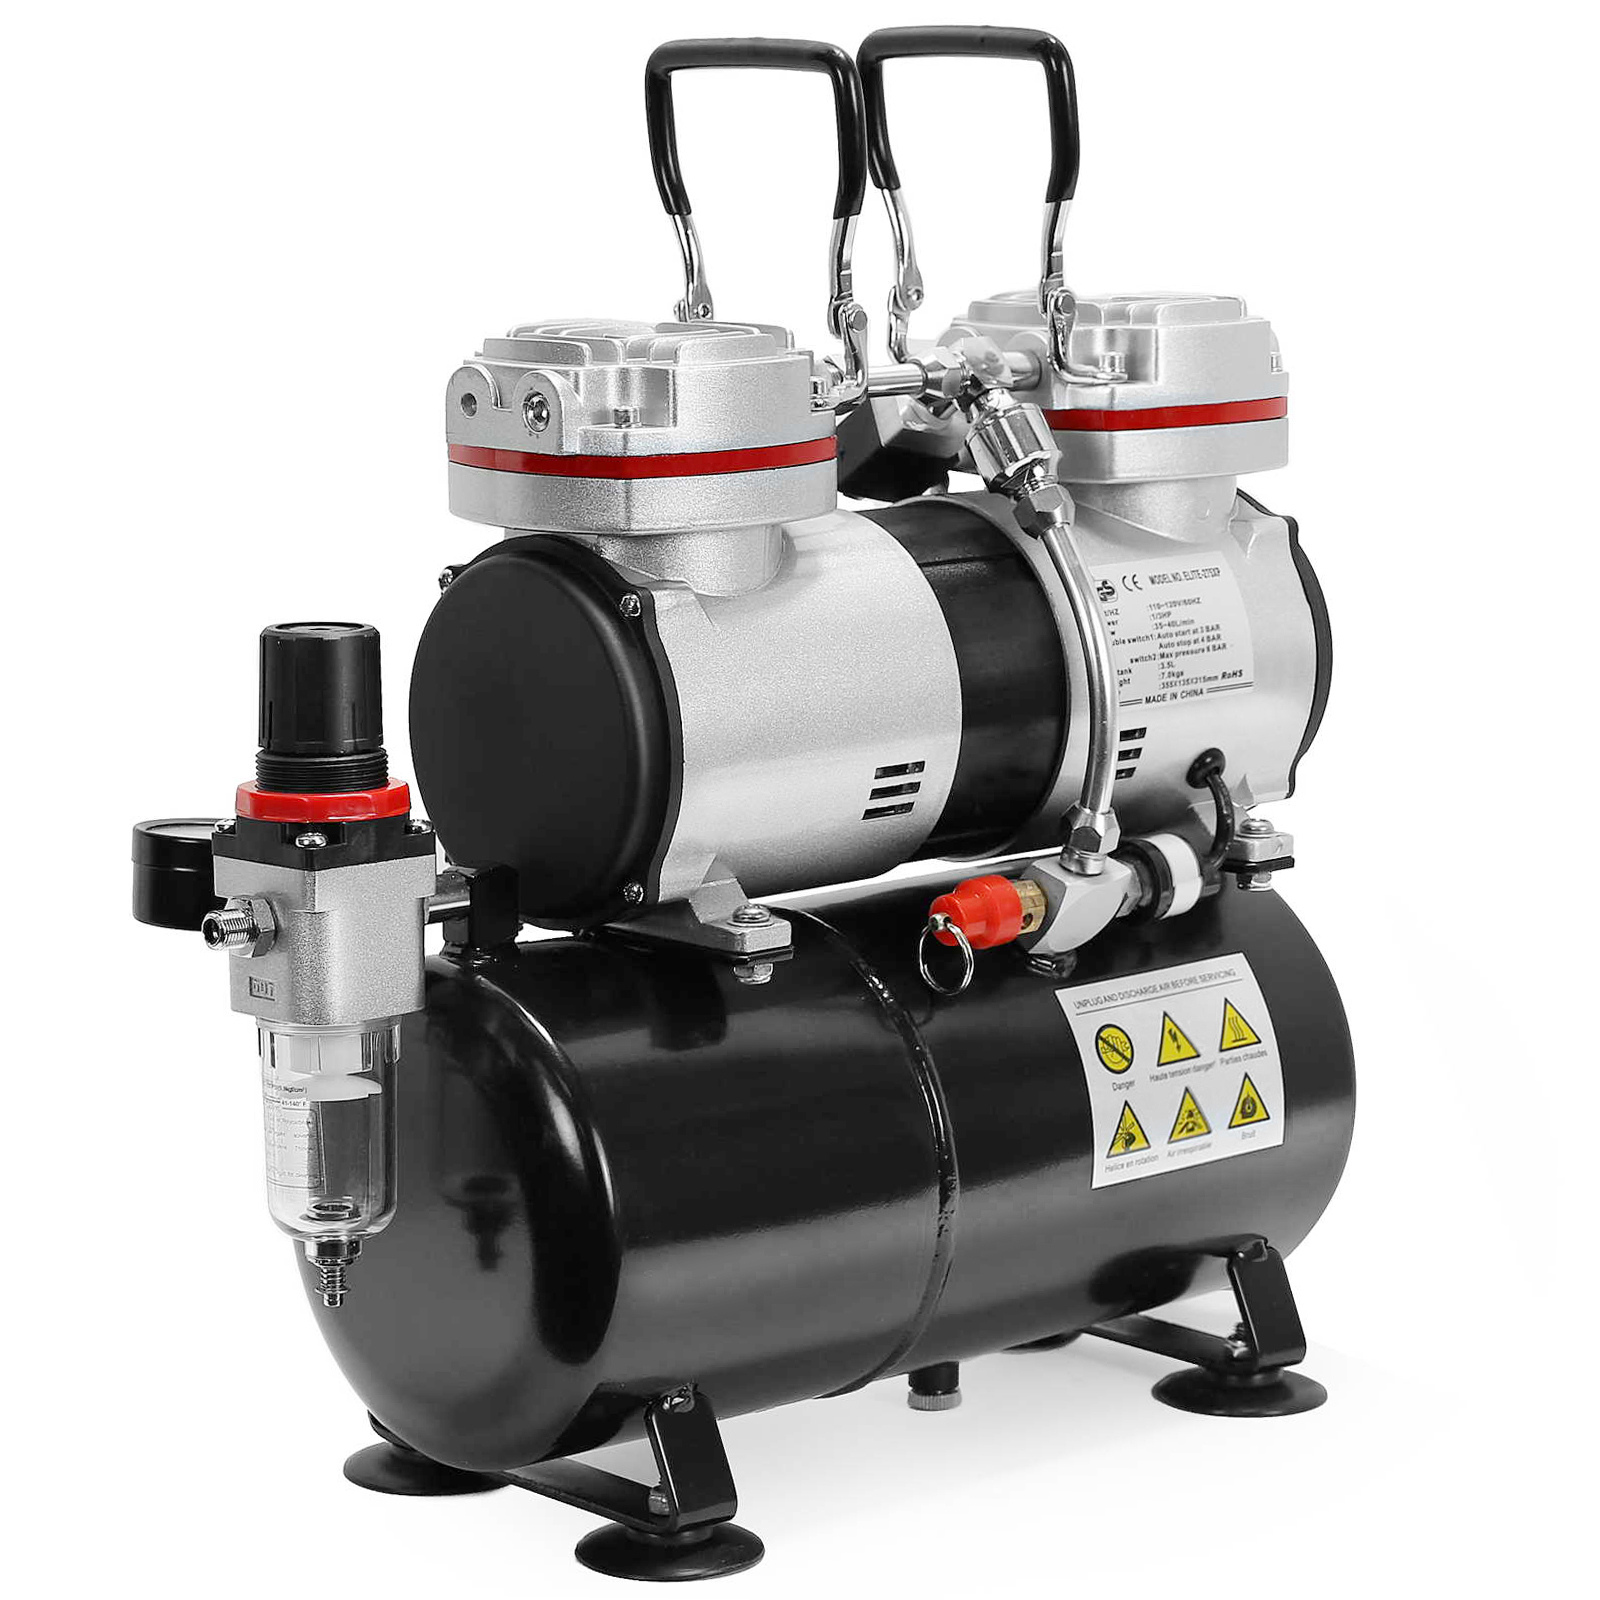 PointZero 1/3 HP Double Piston Airbrush Compressor with Air Tank,  Regulator, Gauge and Water Trap - Quiet Professional Pump 